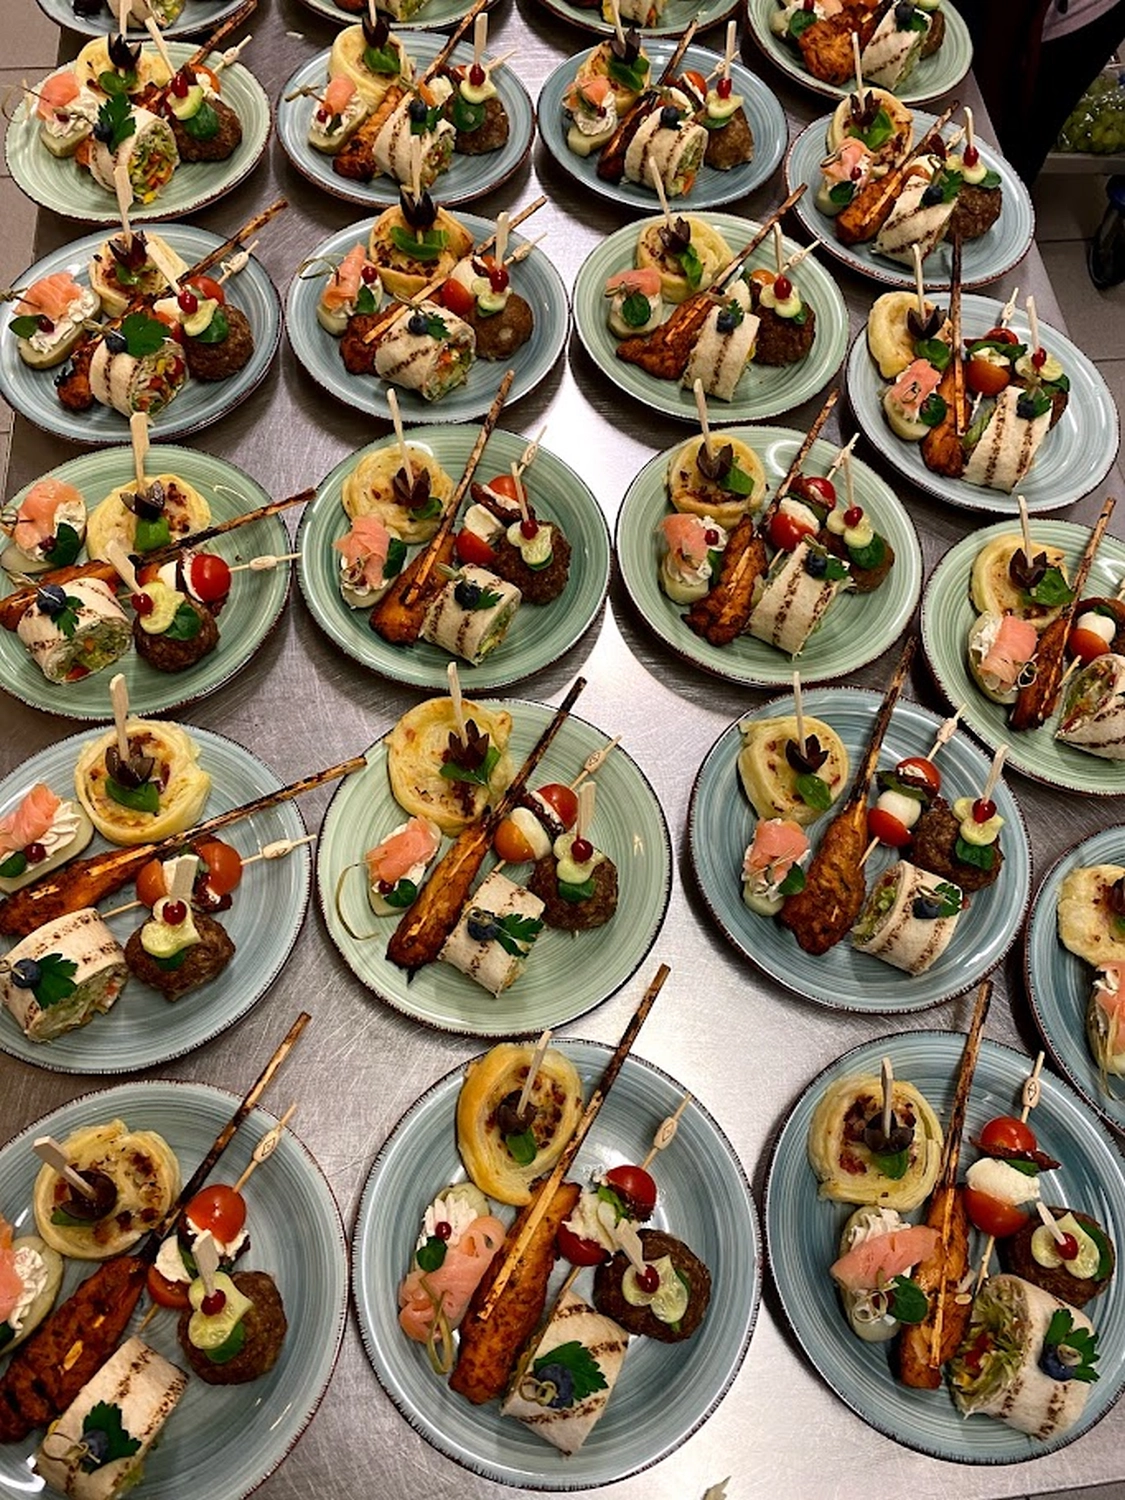 Catering-Service Schimion, Fingerfood